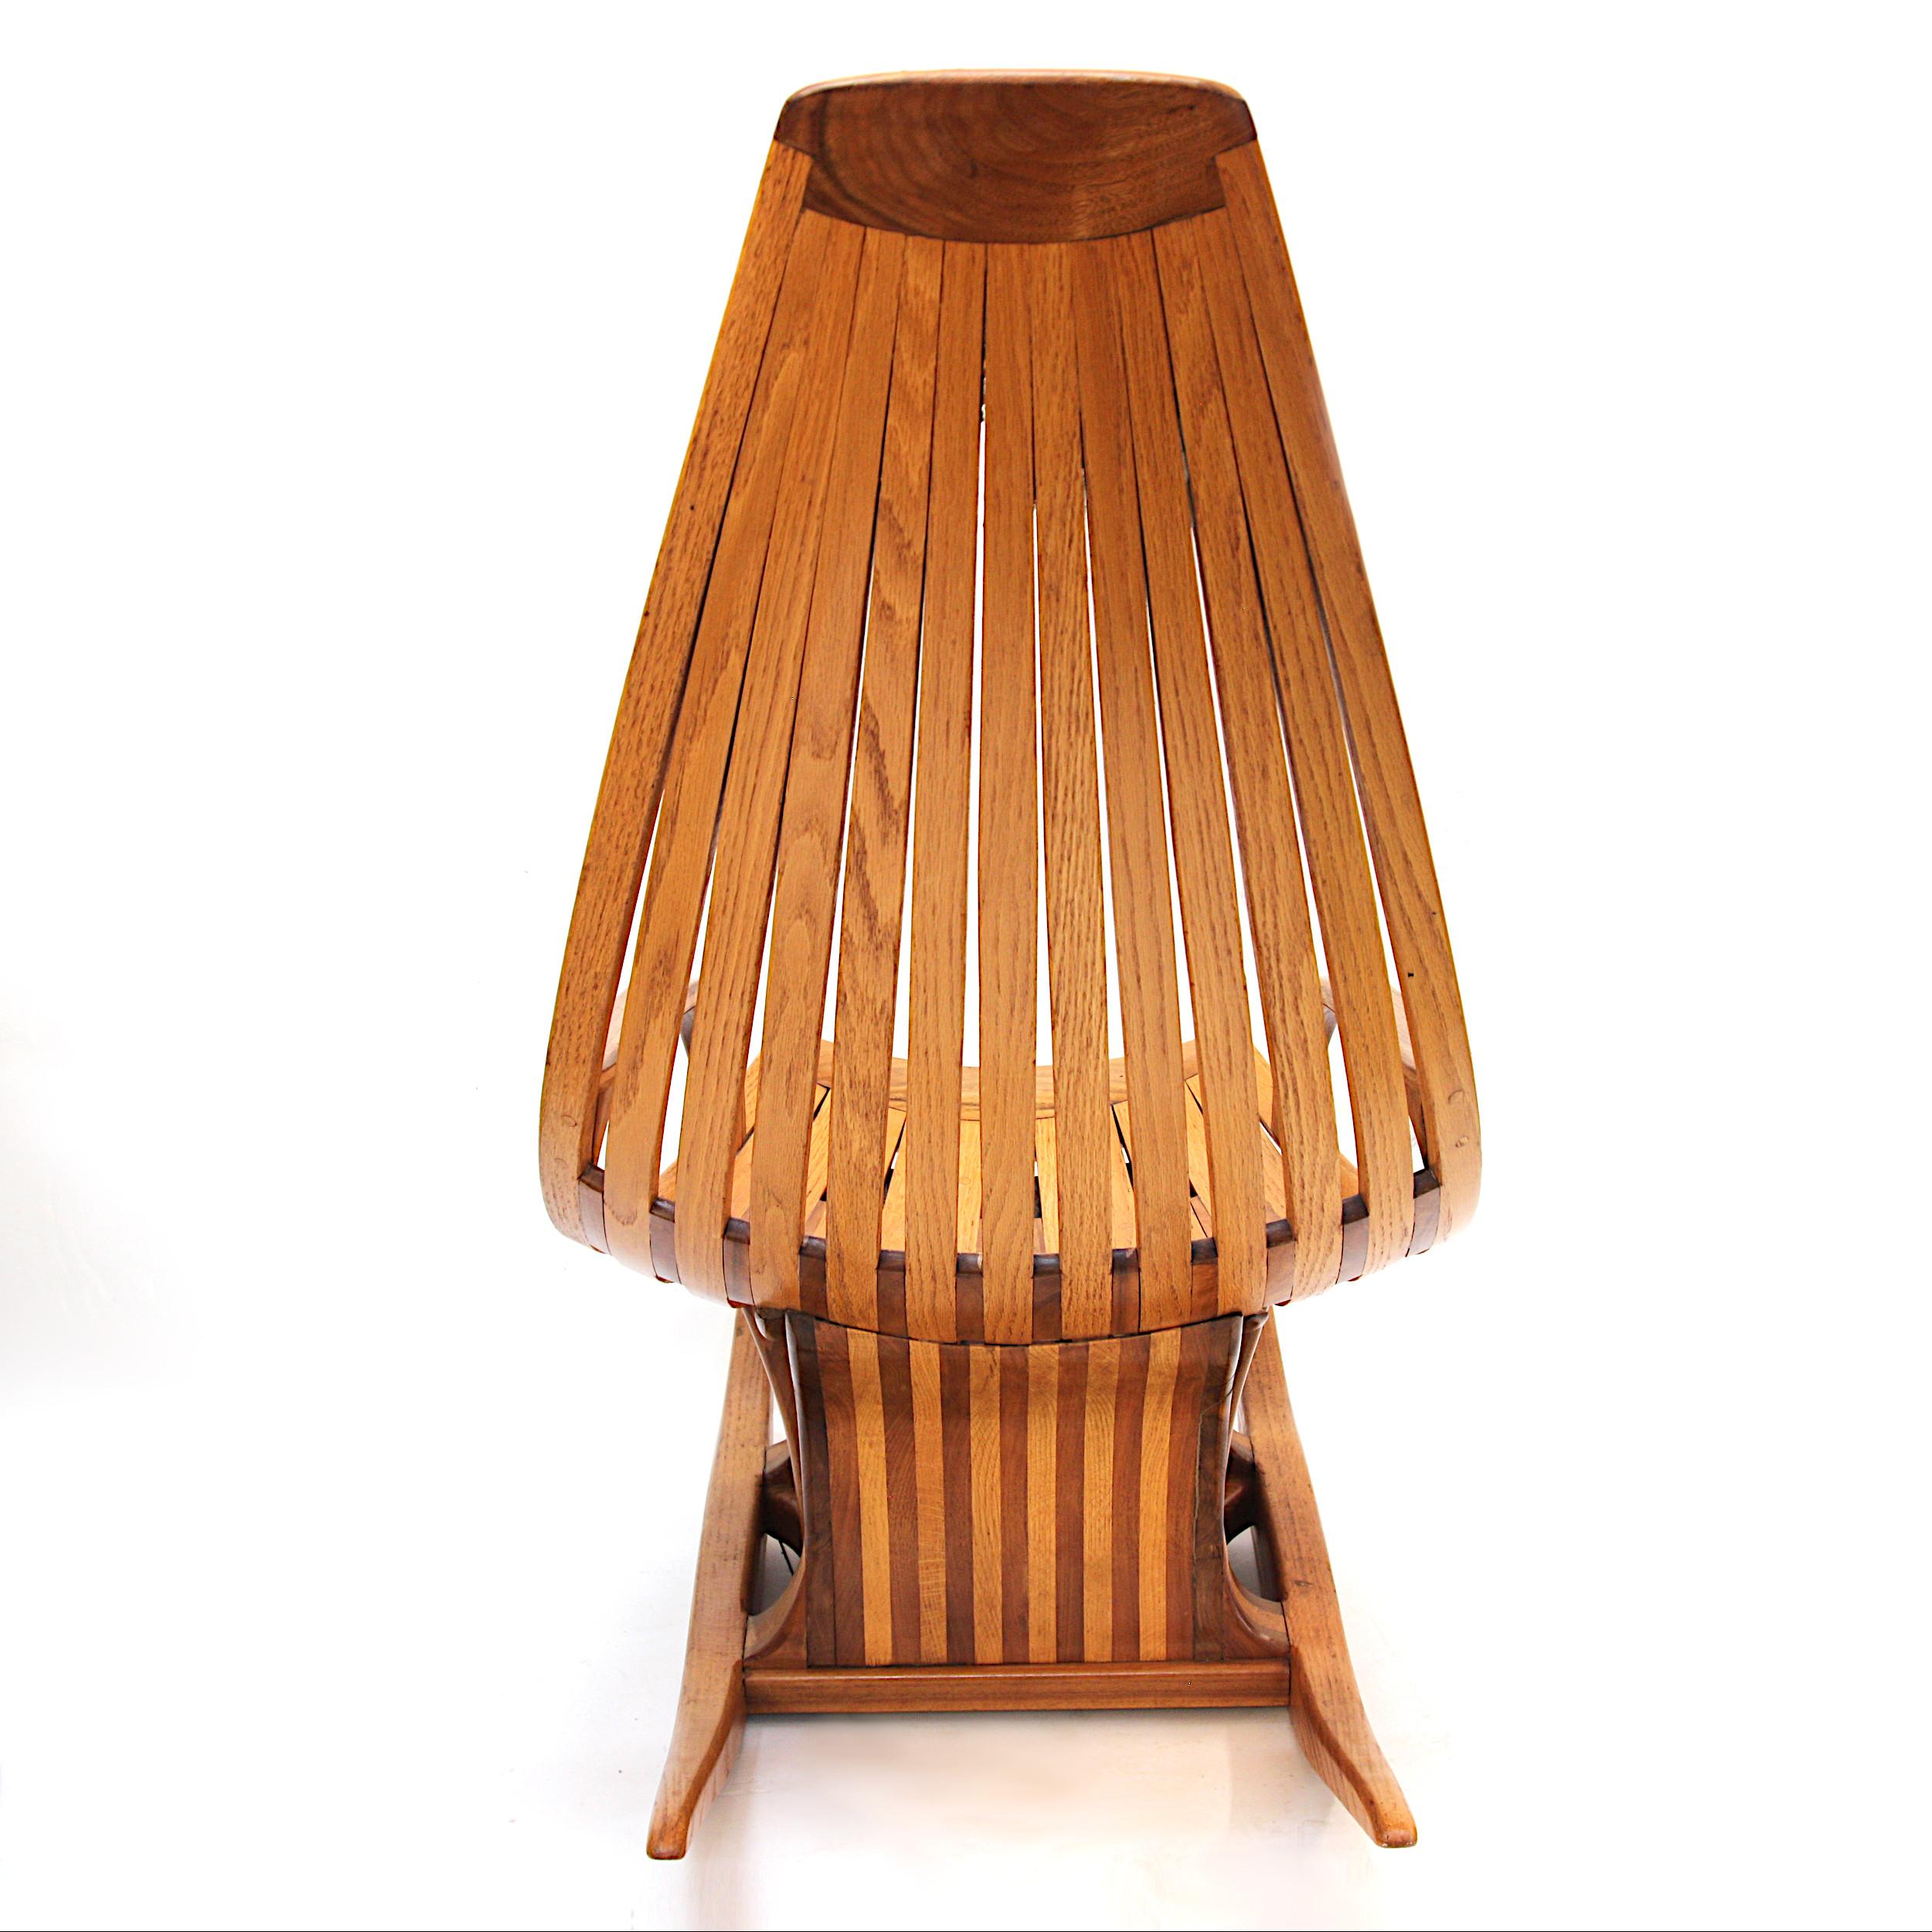 Late 20th Century Vintage American Studio Craft Rocking Chair in the Style of Edward G. Livingston